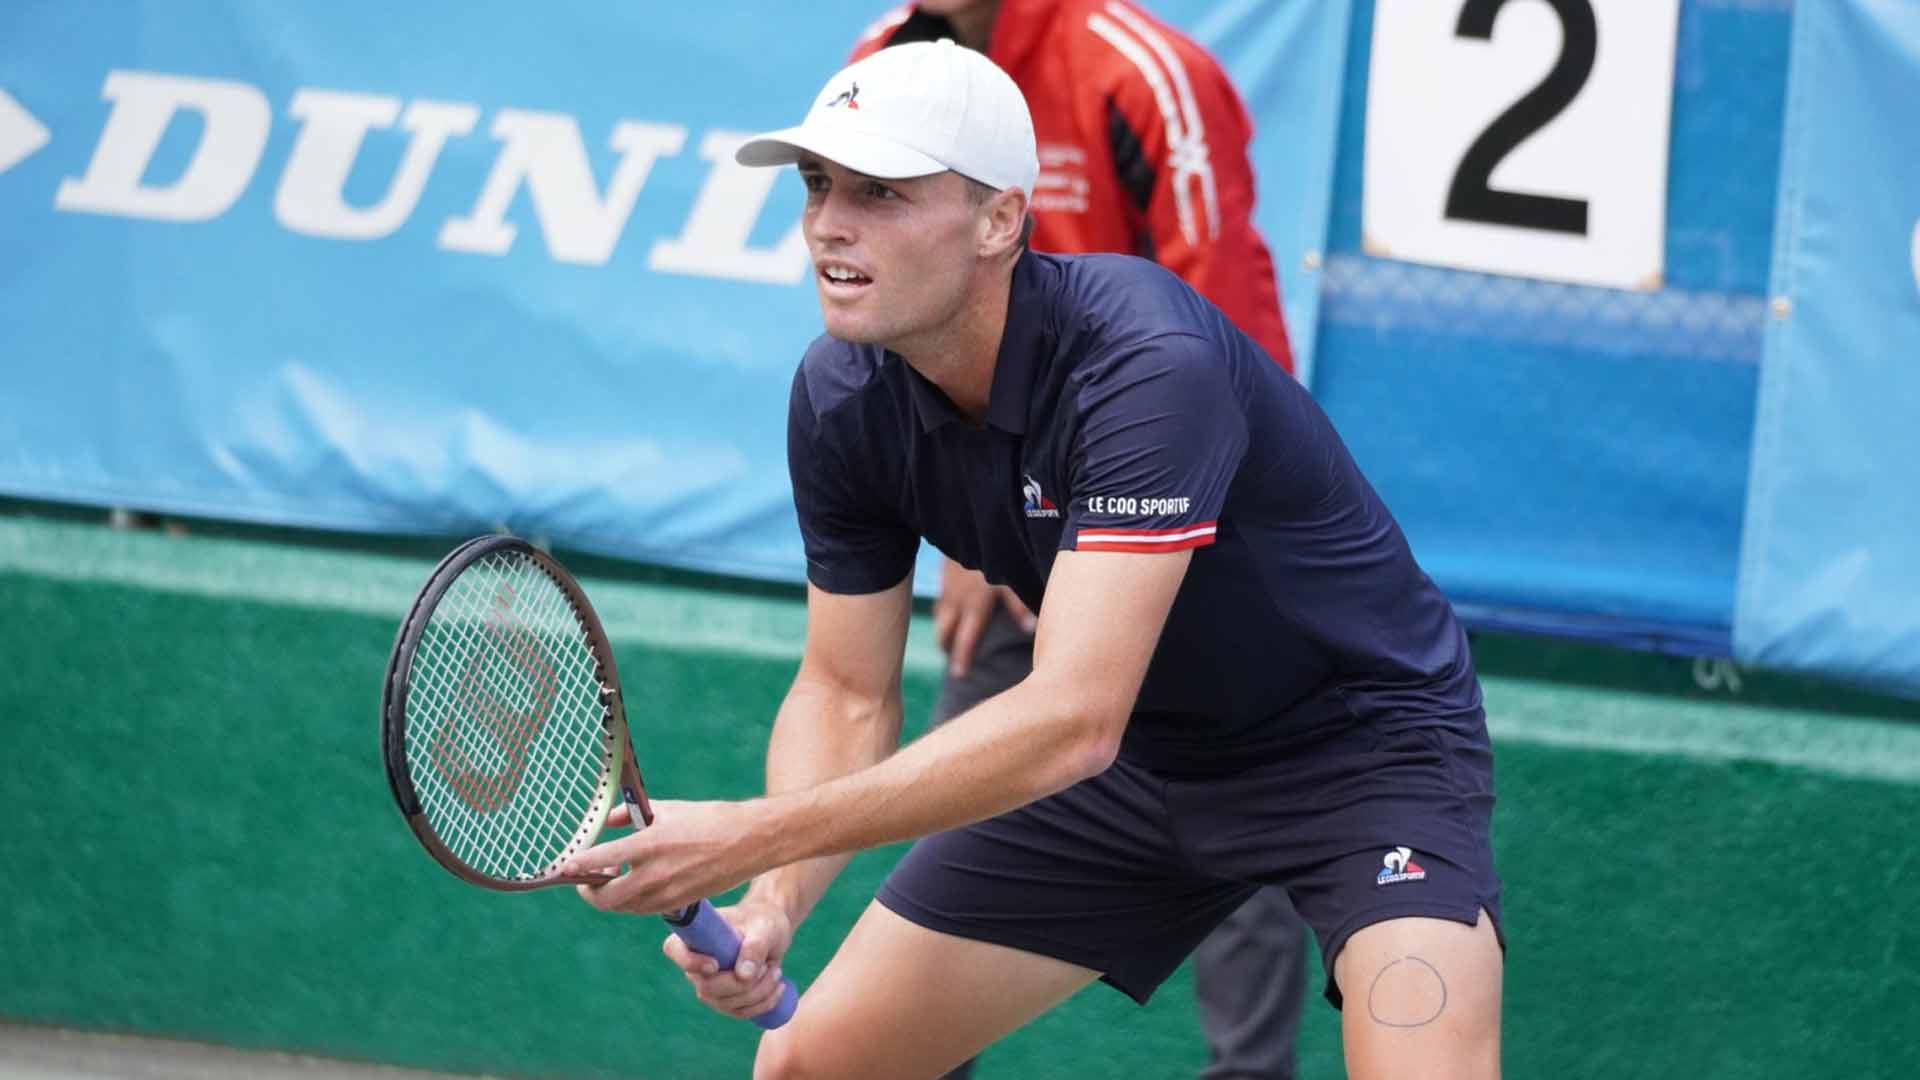 Chris O'Connell in action at the 2022 Yokohama Challenger.